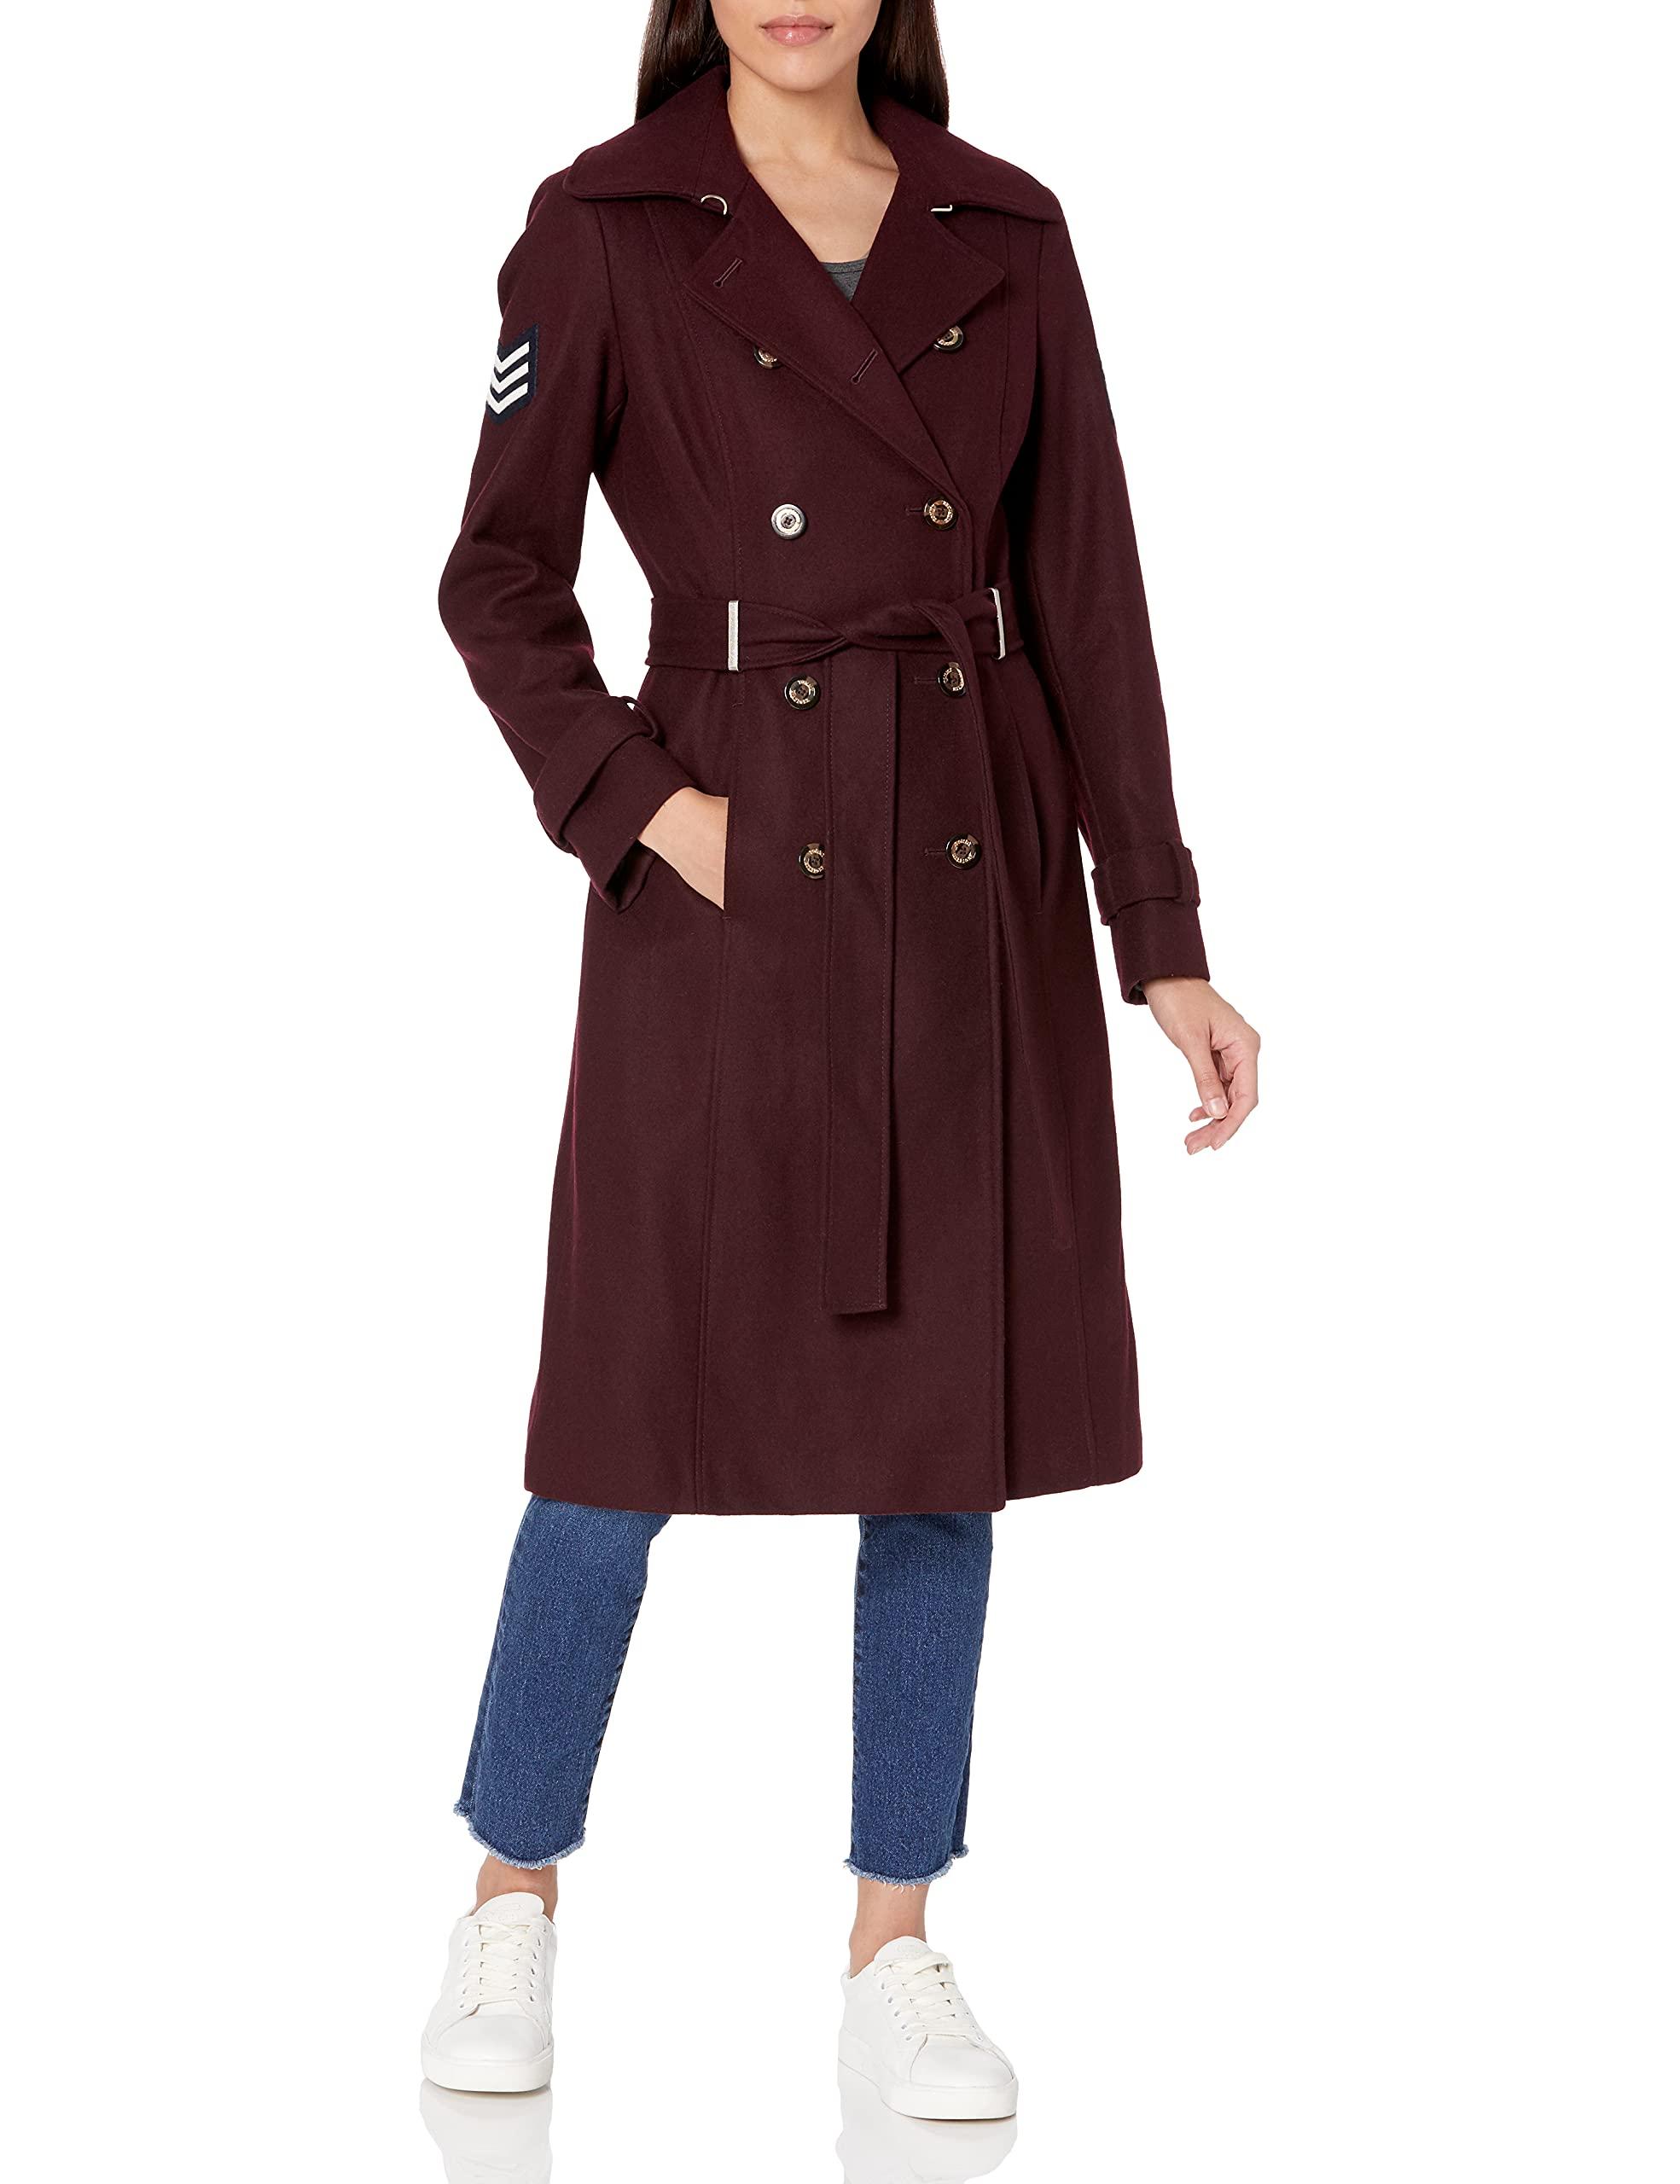 Tommy Hilfiger Wool Blend Military Coat in Red - Lyst